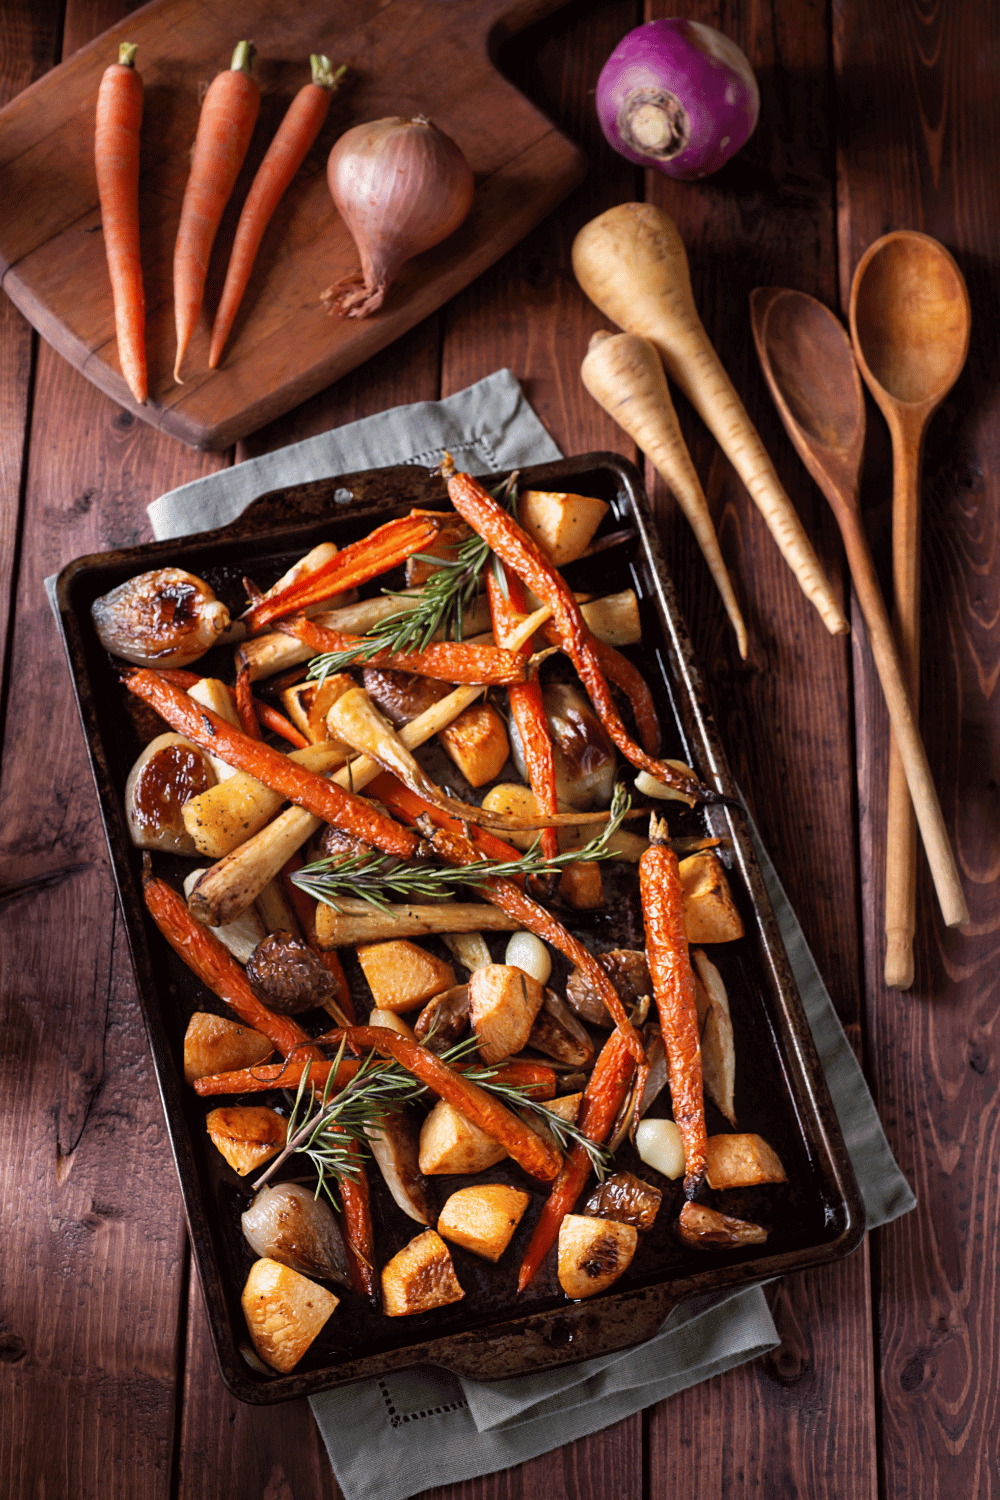 roasted carrots, beets and turnips as a vegetable side dish for tacos